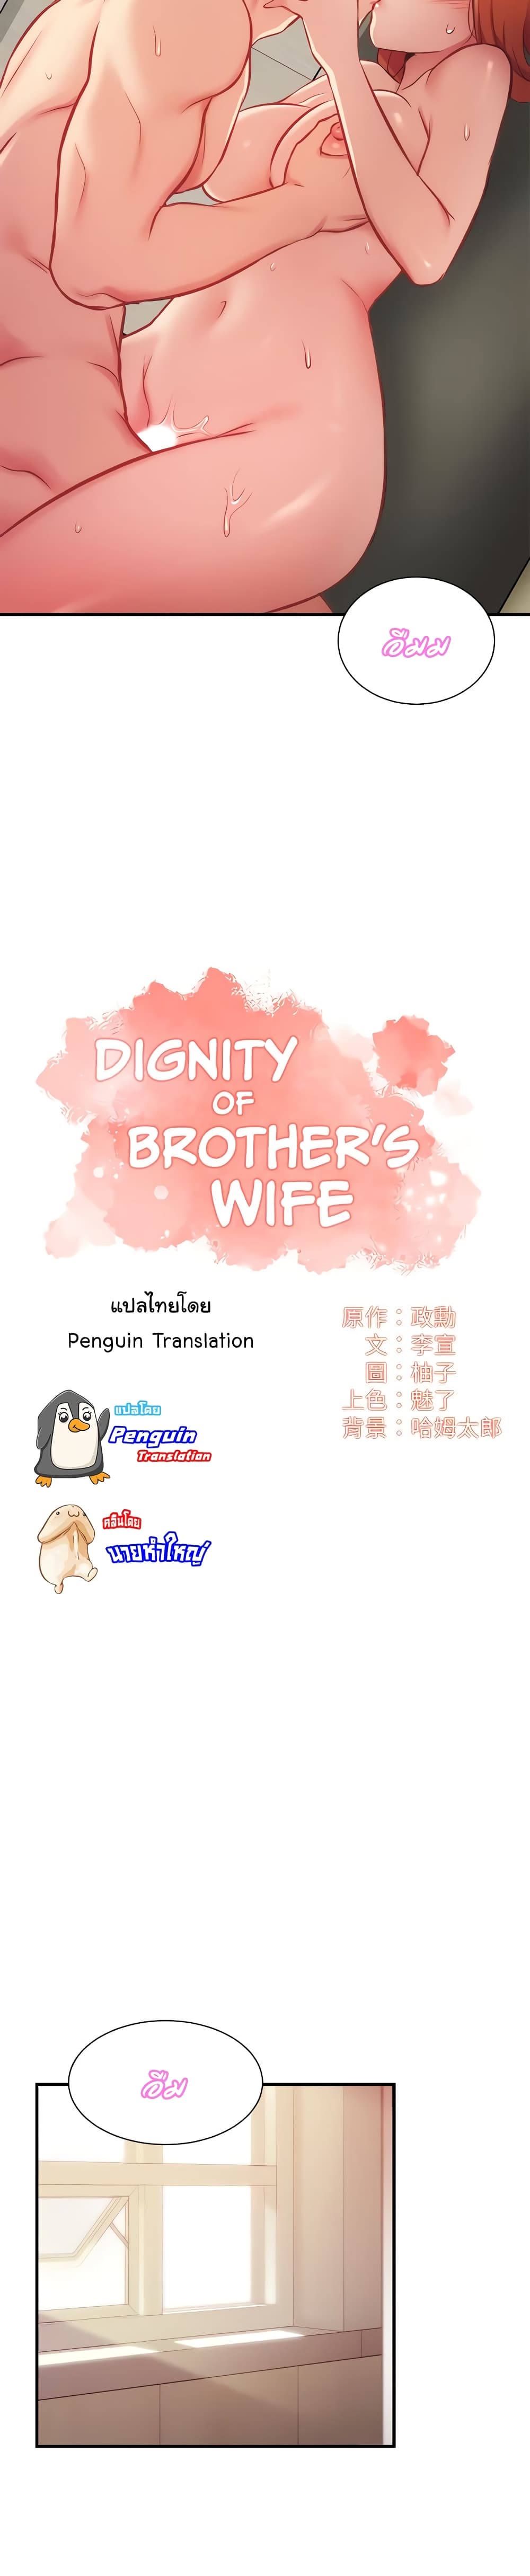 Brother's Wife Dignity 25 02